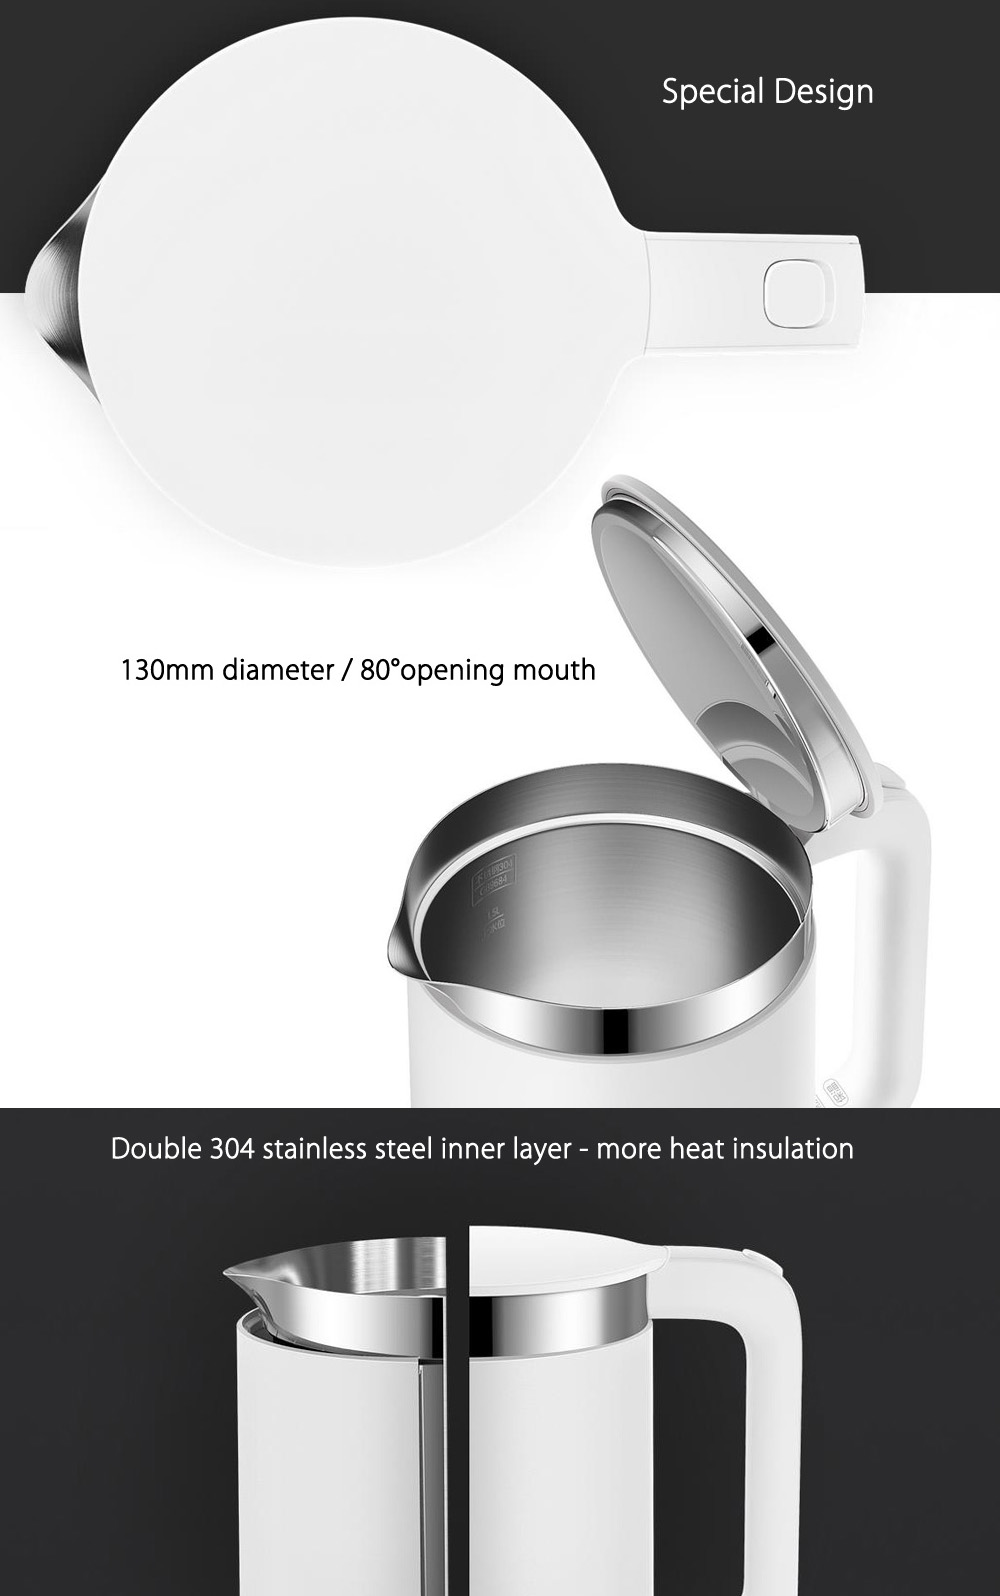 XIAOMI Mijia 1.5L / 1800W Smart Electric Water Kettle 304 Stainless Steel 12H Temperature Control Mihome App Control